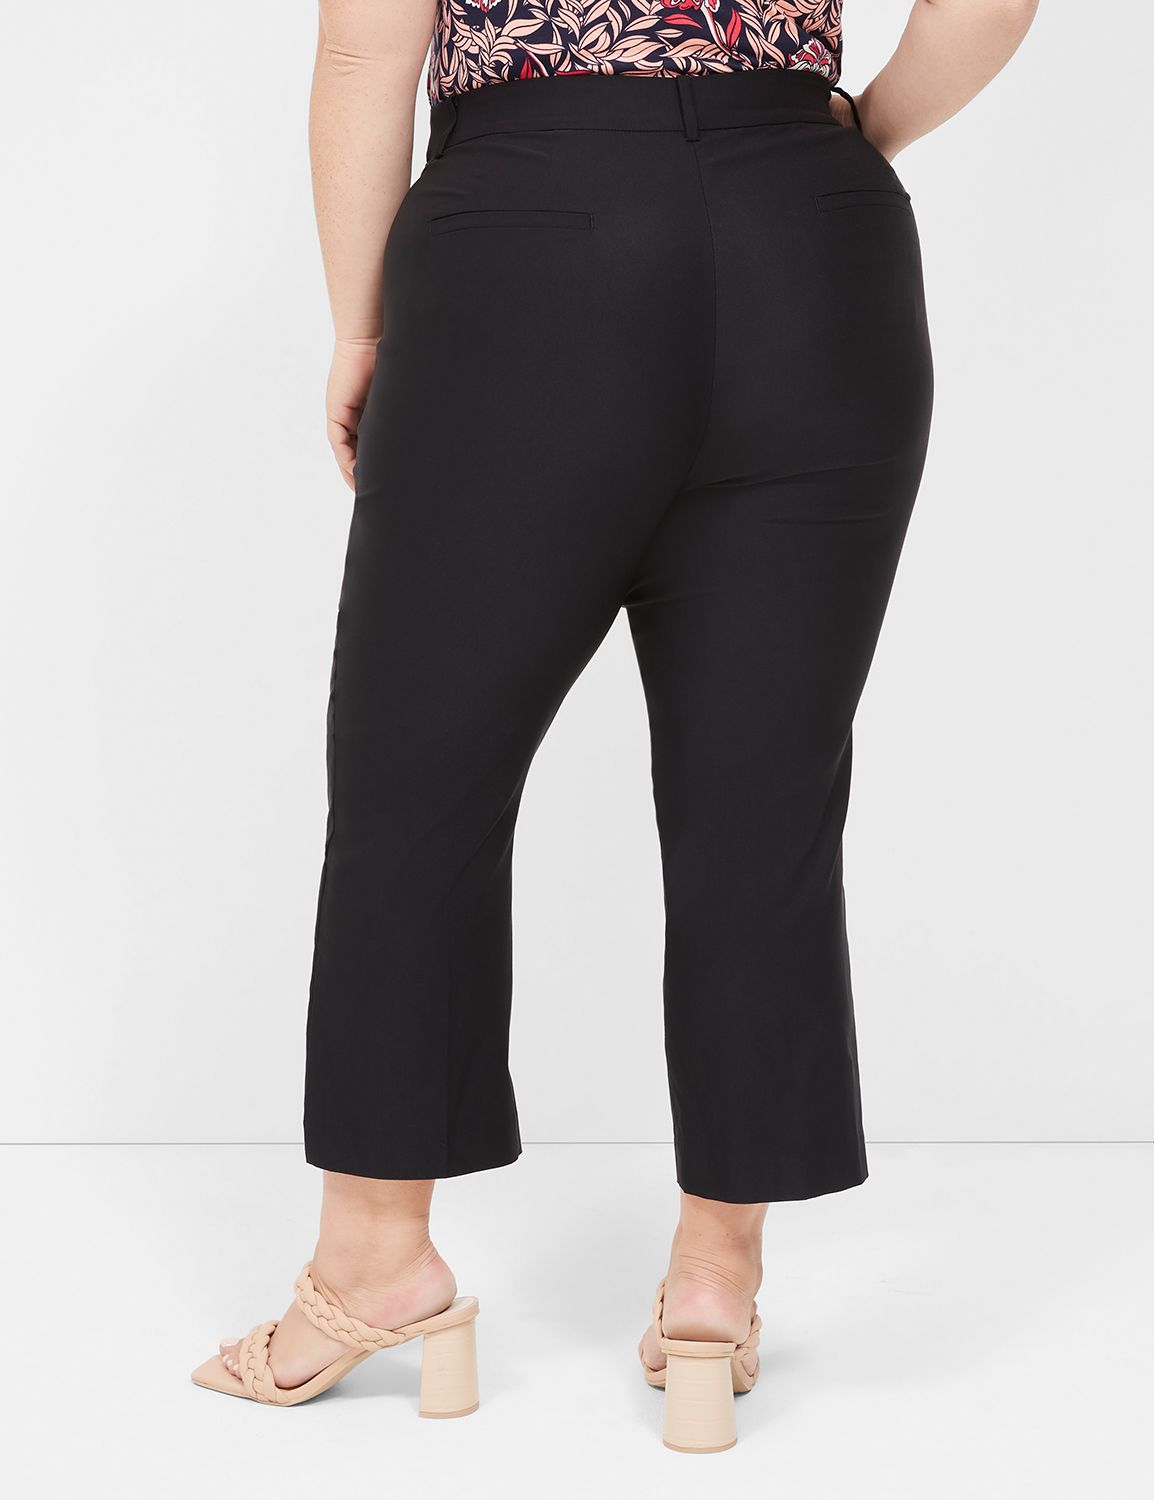 The most comfortable bottoms available at Lastinch! Size available -  XXS-8XL #LASTINCH #MadeForCurves #plussizefash…